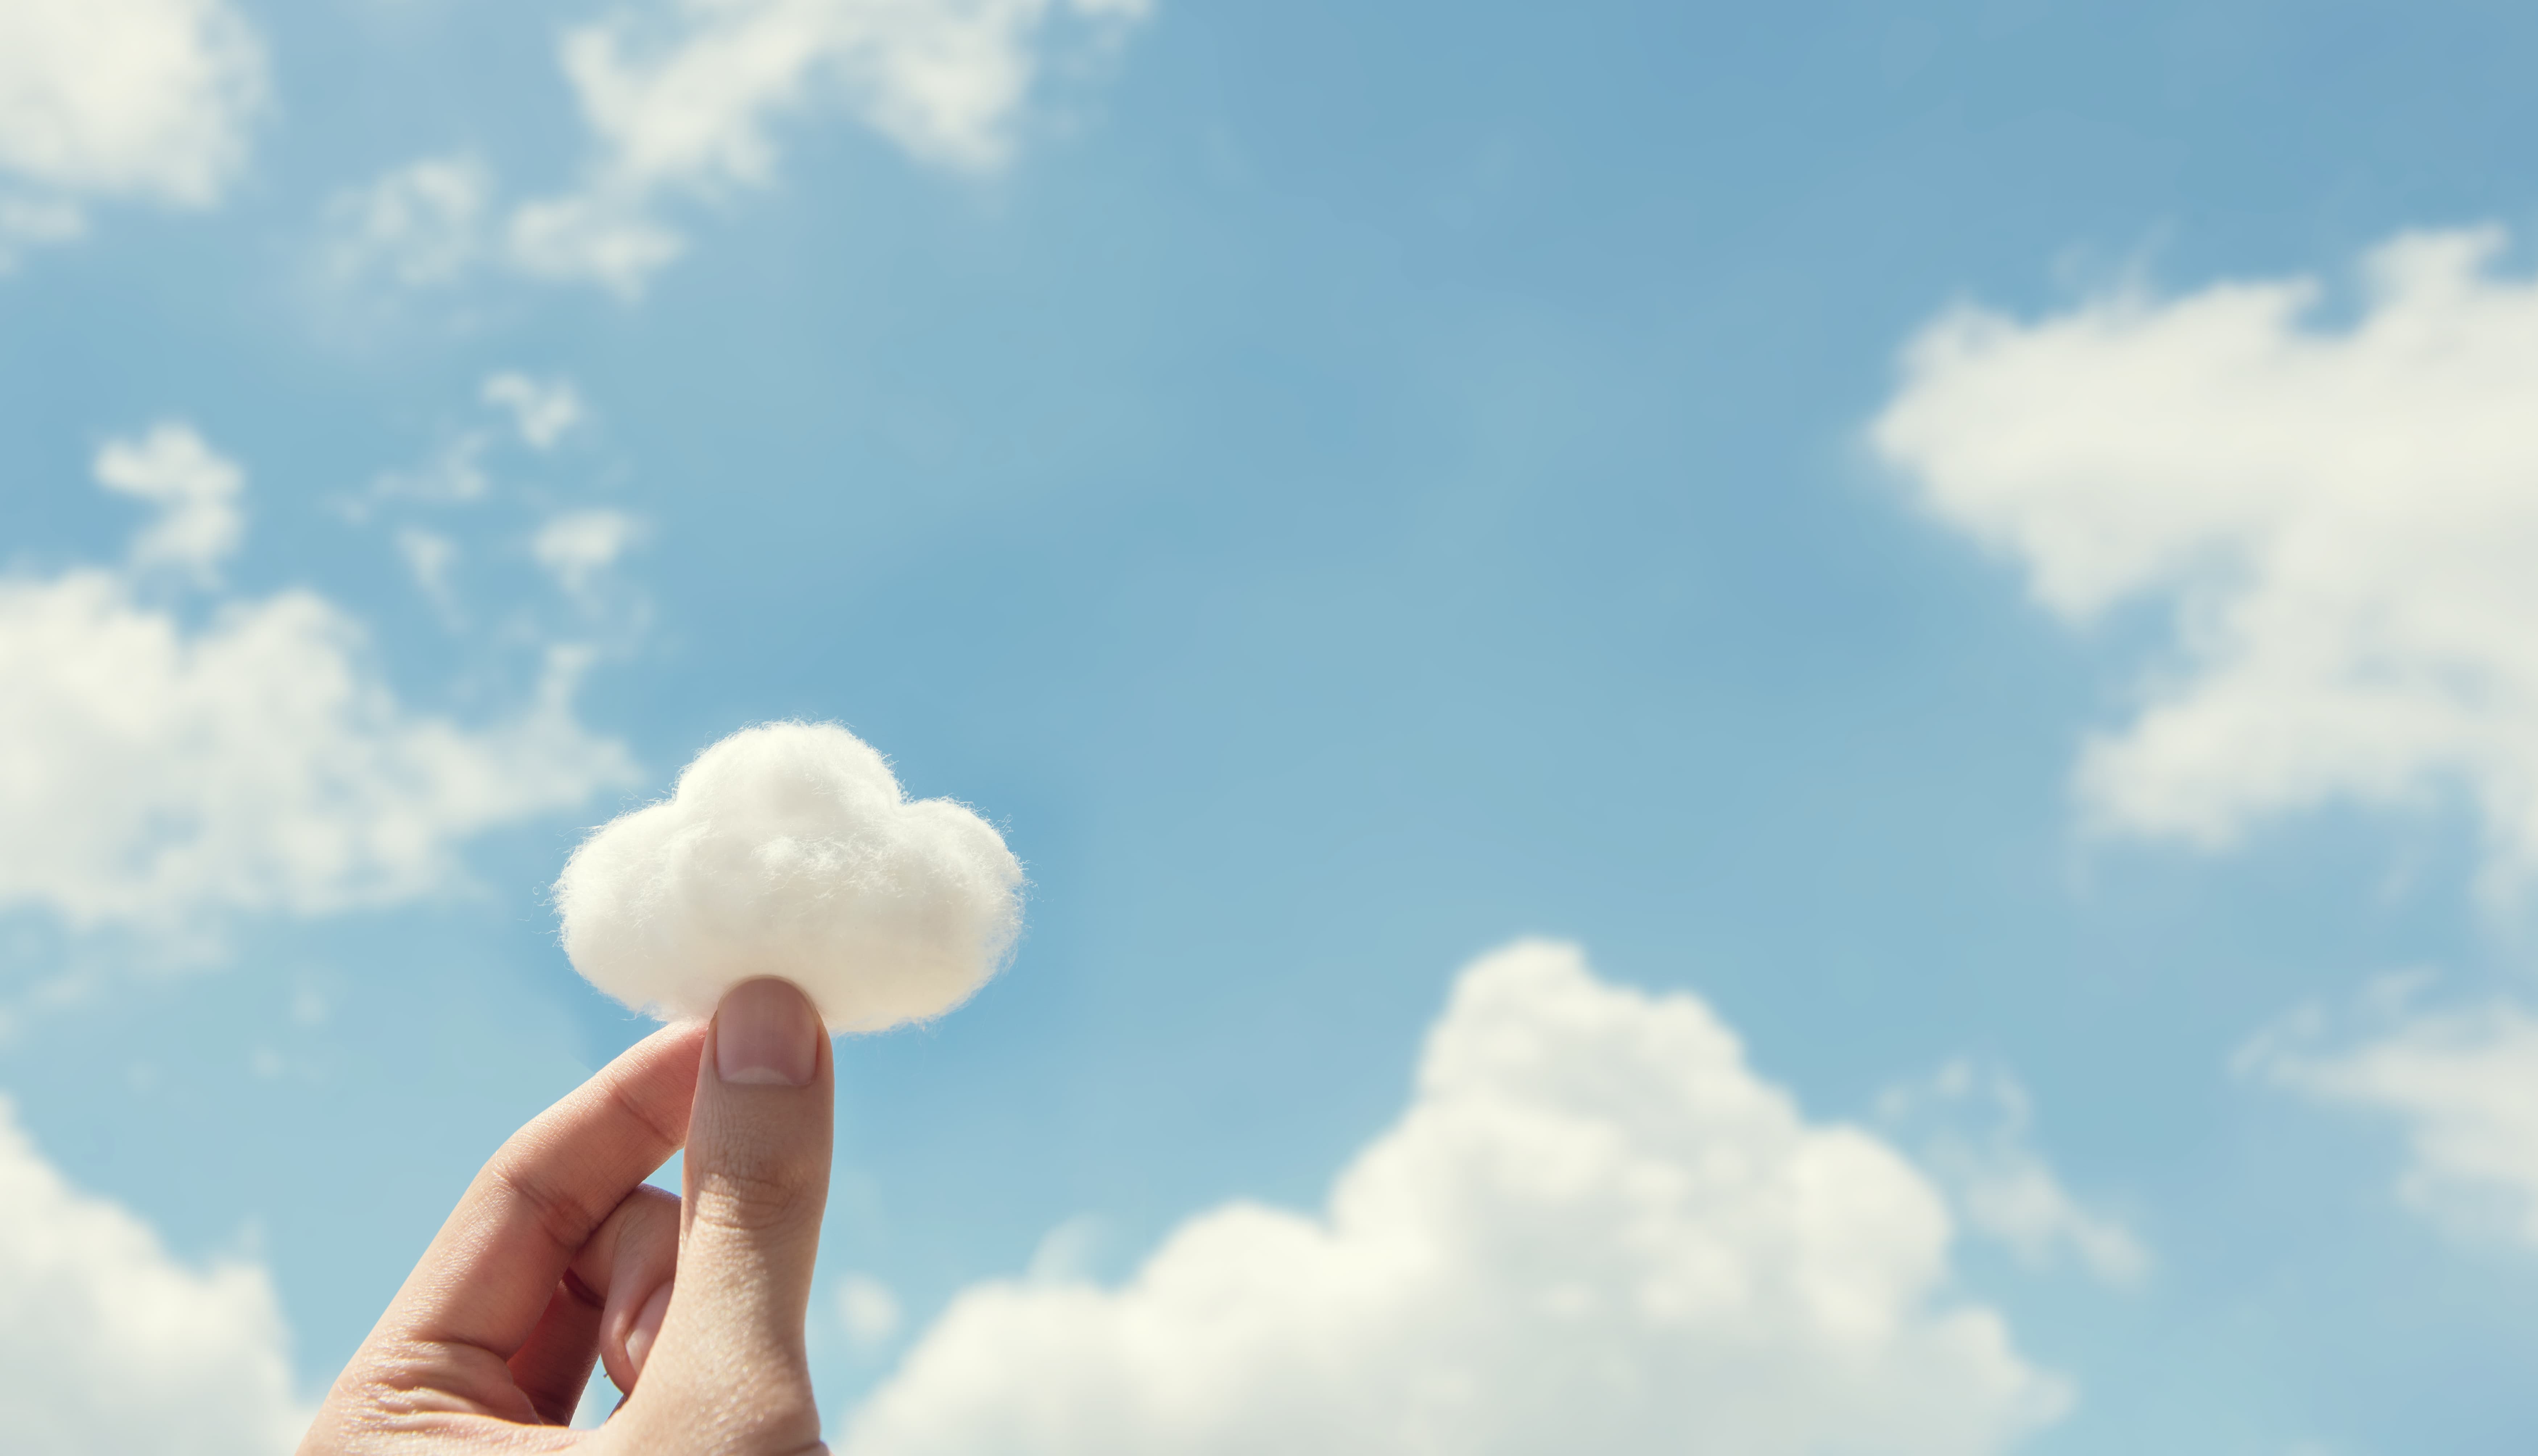 Why to choose an open source cloud software?